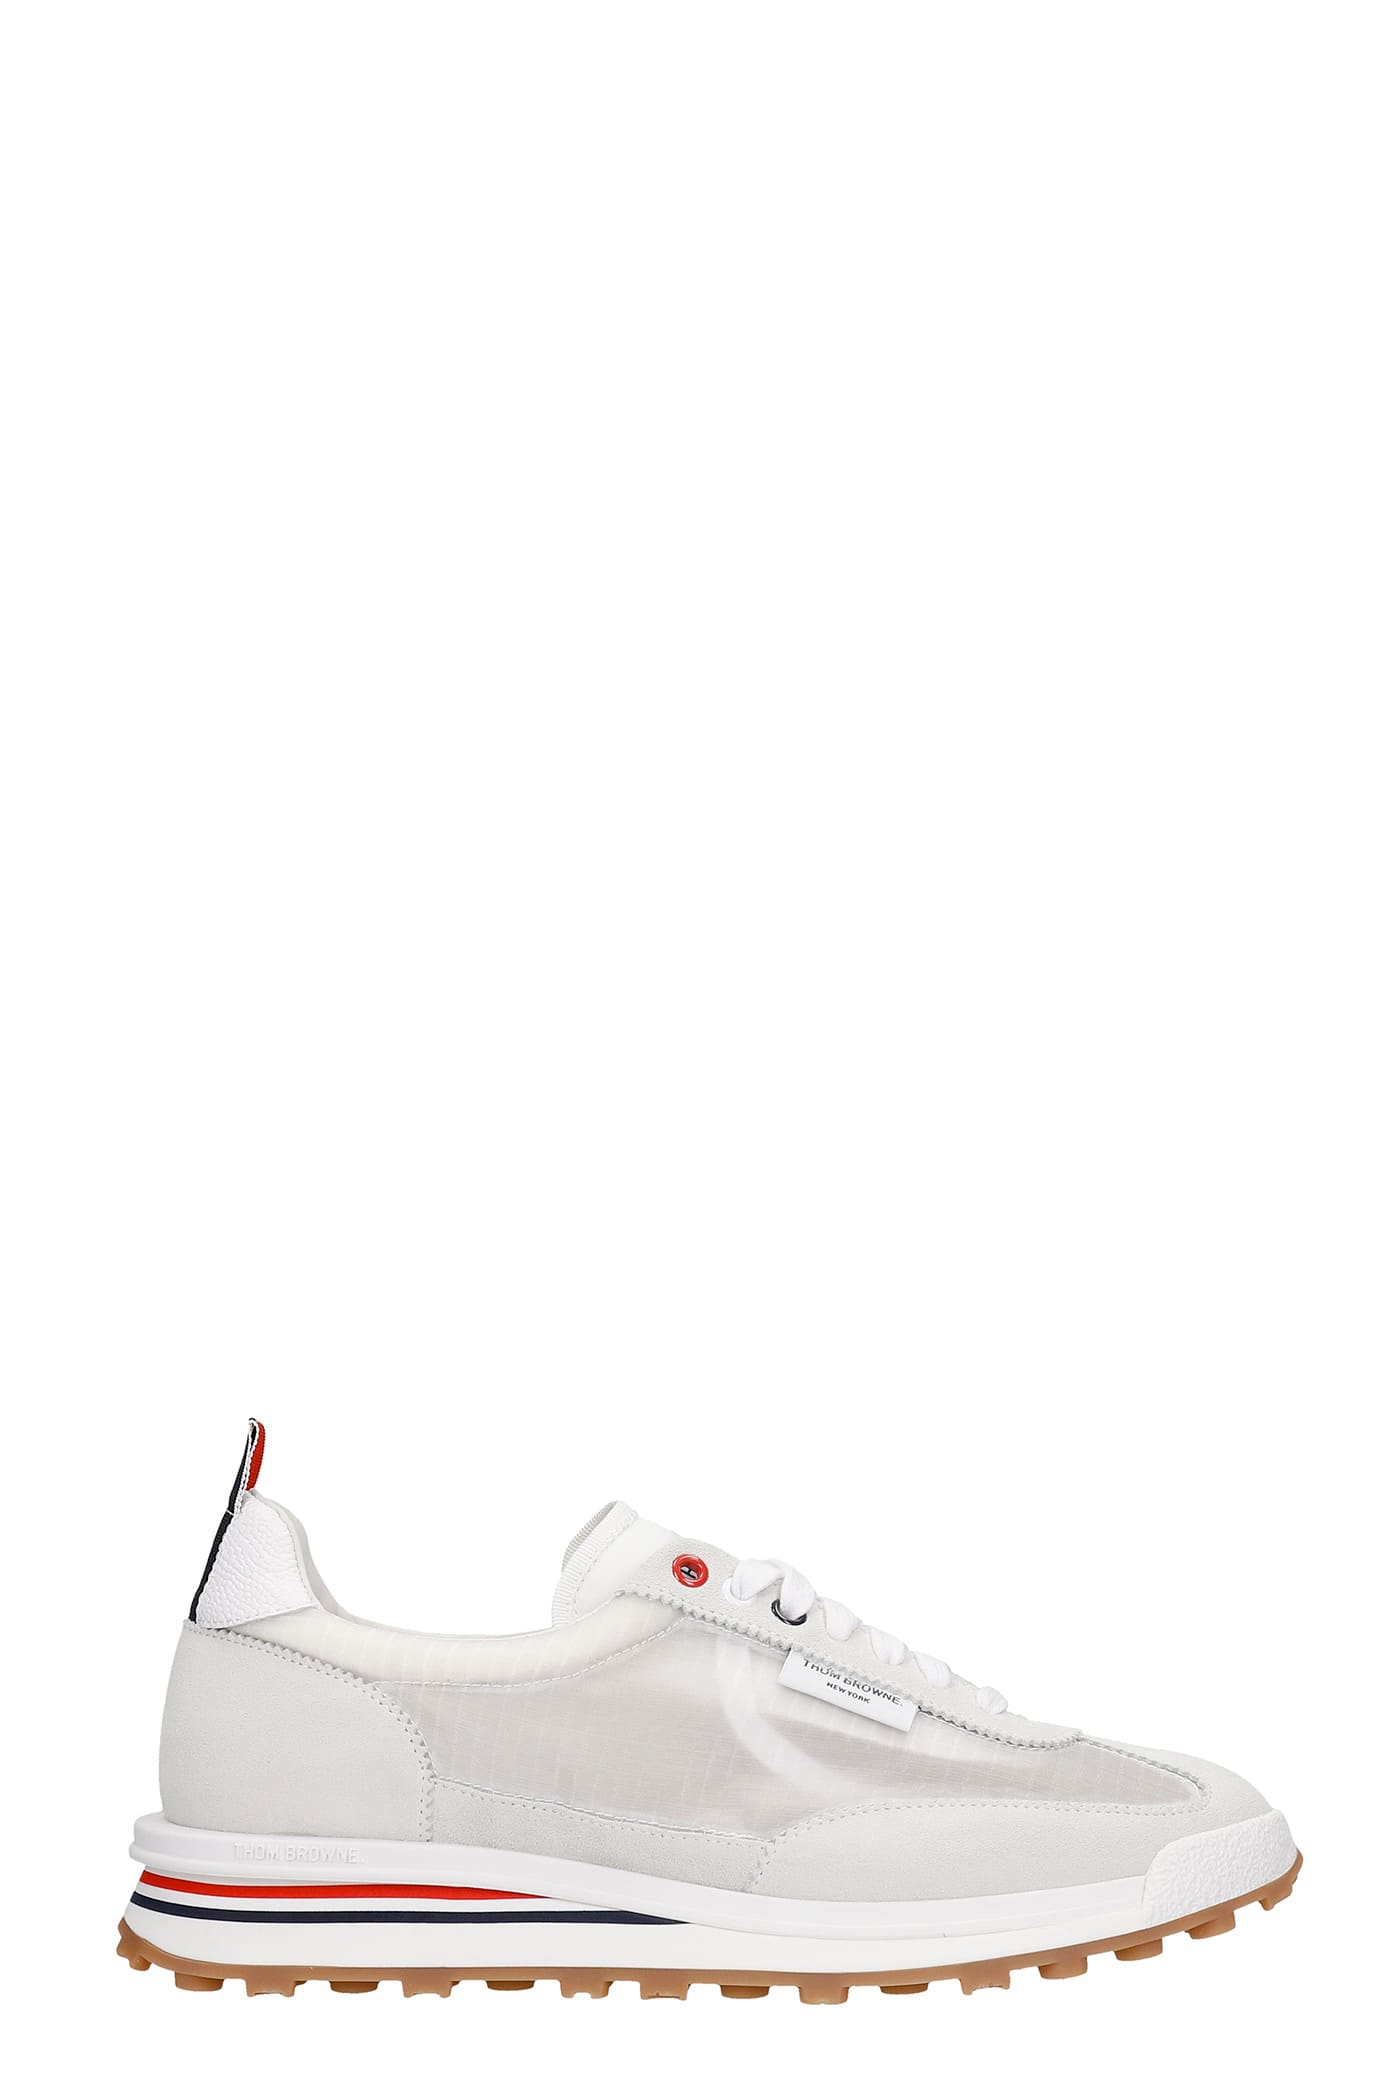 Thom Browne Sneakers In White Polyester